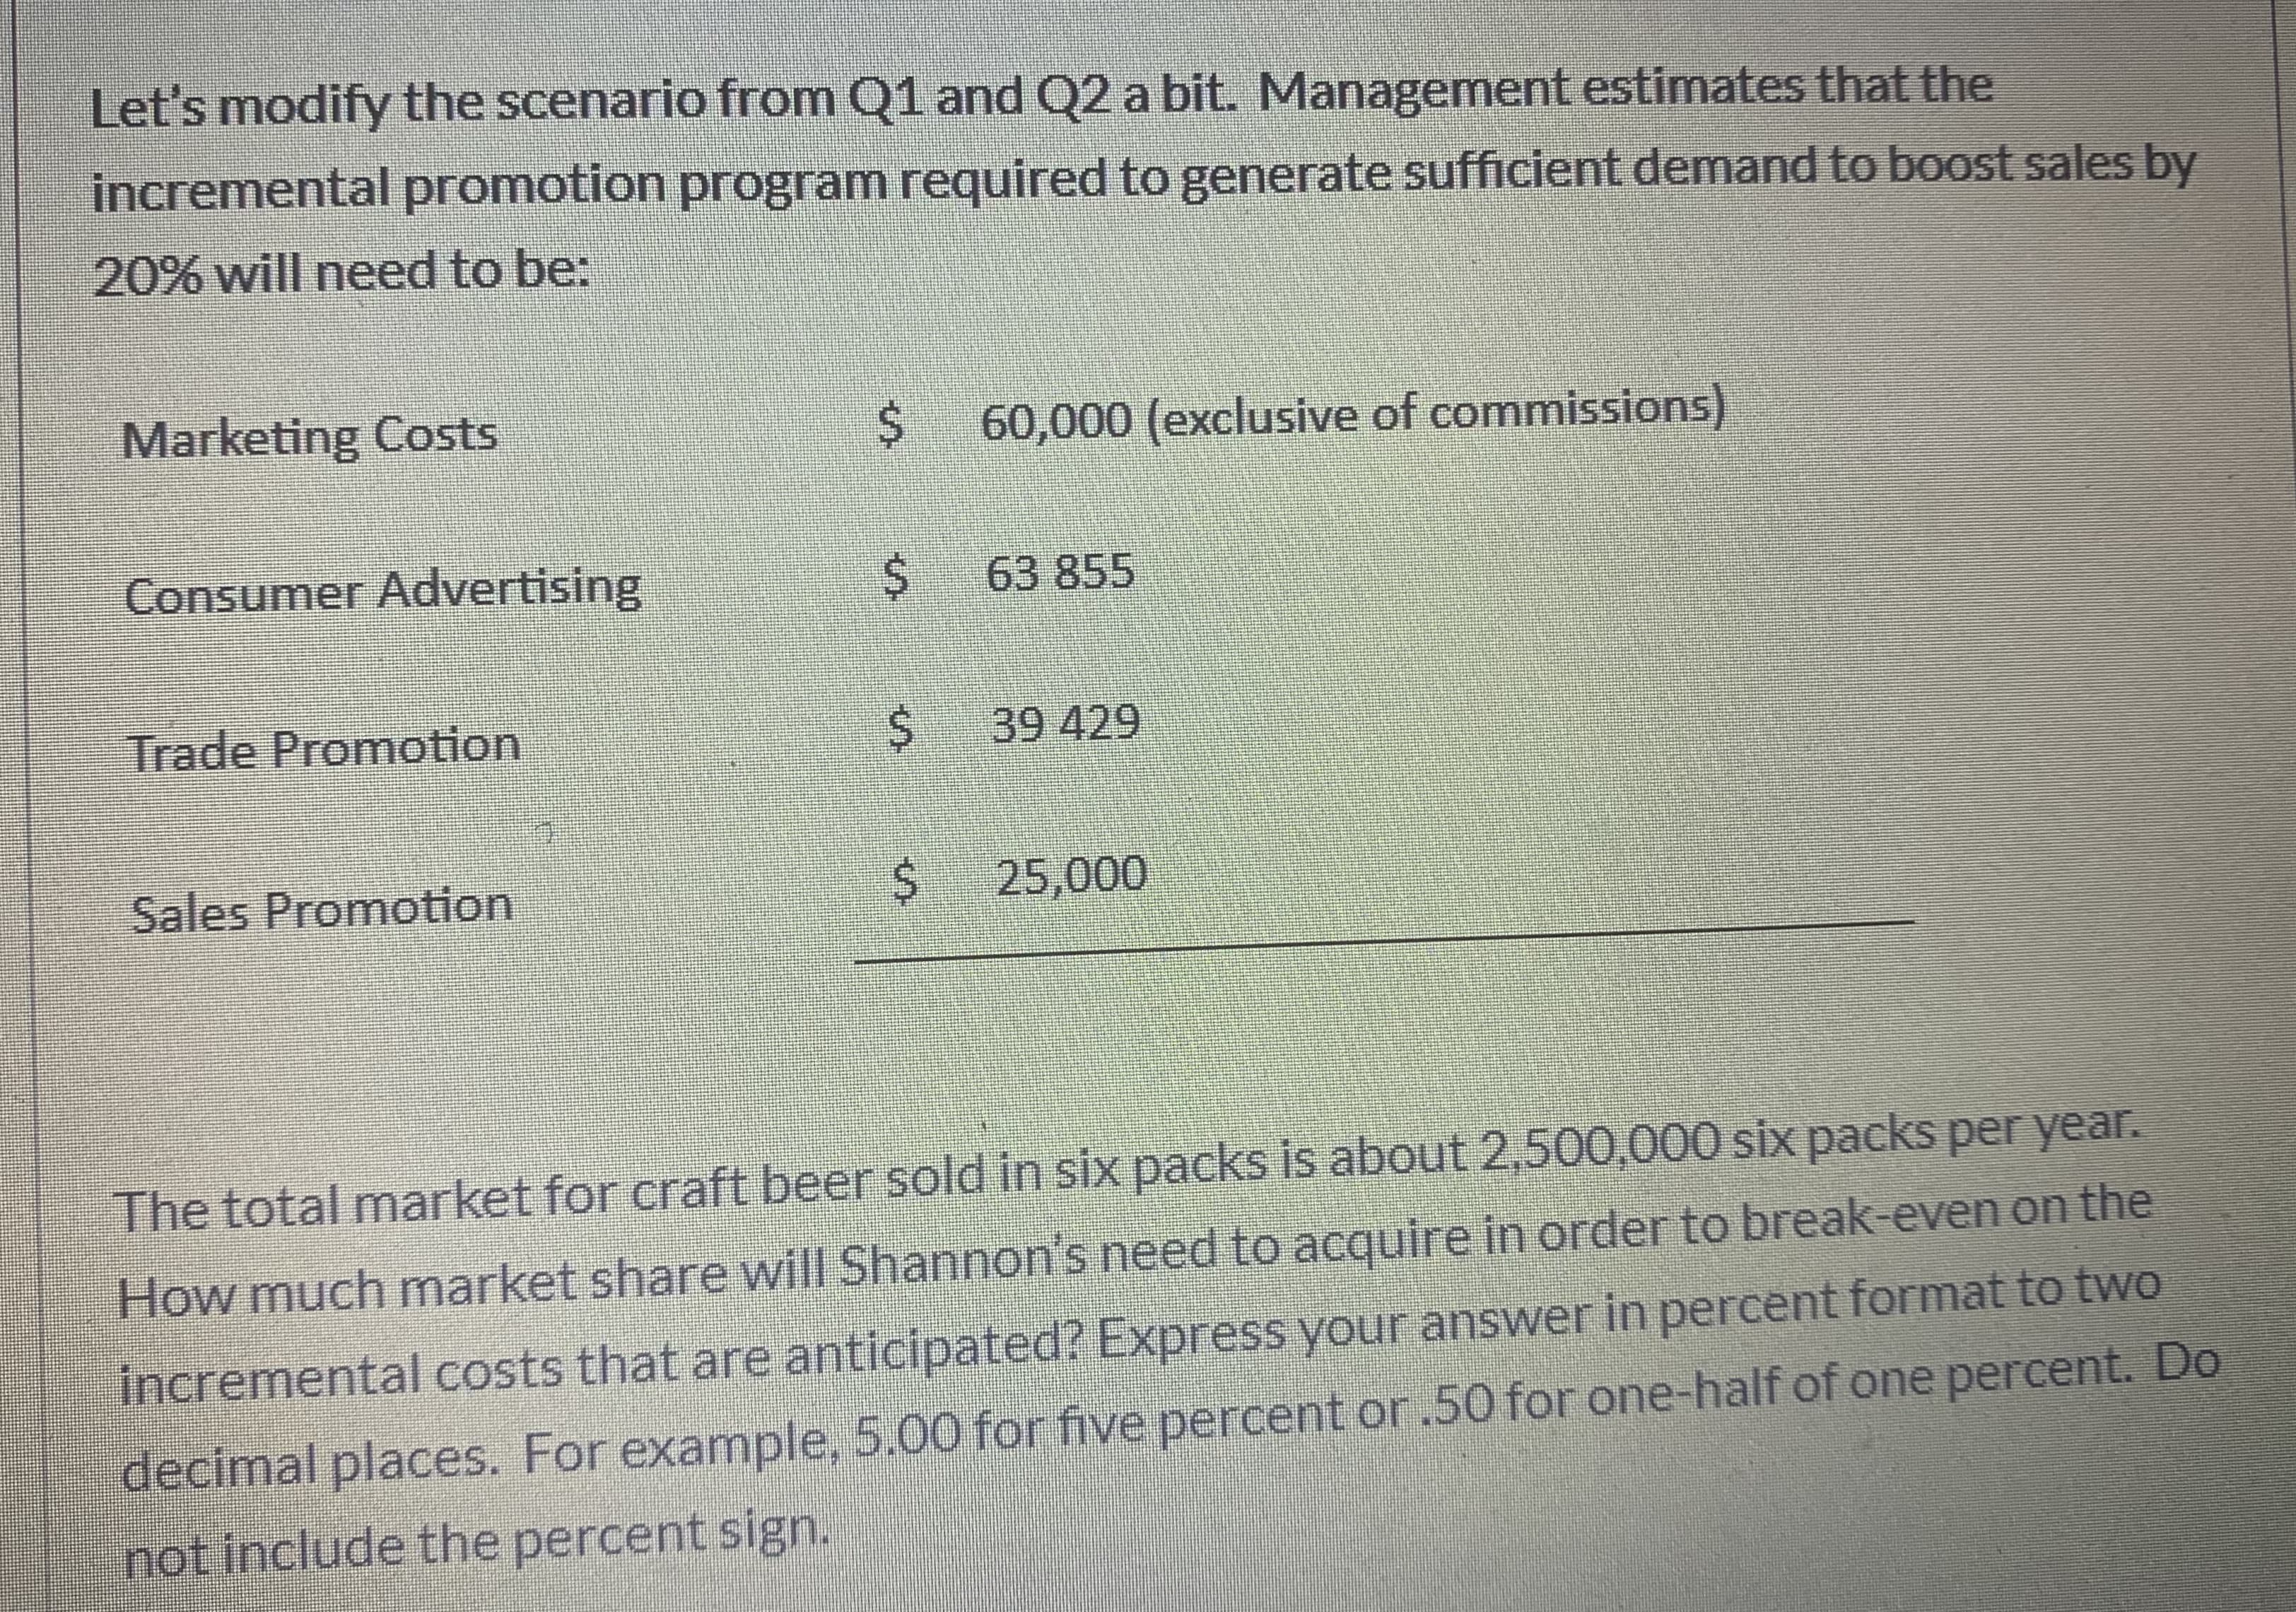 Let's modify the scenario from Q1 and Q2 a bit. Management estimates that the
incremental promotion program required to generate sufficient demand to boost sales by
20% will need to be:
Marketing Costs
60,000 (exclusive of commissions)
Consumer Advertising
$63 855
Trade Promotion
39 429
Sales Promotion
25,000
The total market for craft beer sold in six packs is about 2,500,000 six packs per year.
How much market share will Shannon's need to acquire in order to break-even on the
incremental costs that are anticipated? Express your answer in percent format to two
decimal places. For example, 5.00 for five percent or.50 for one-half of one percent. Do
not include the percent sign.
%24
%24
%24
